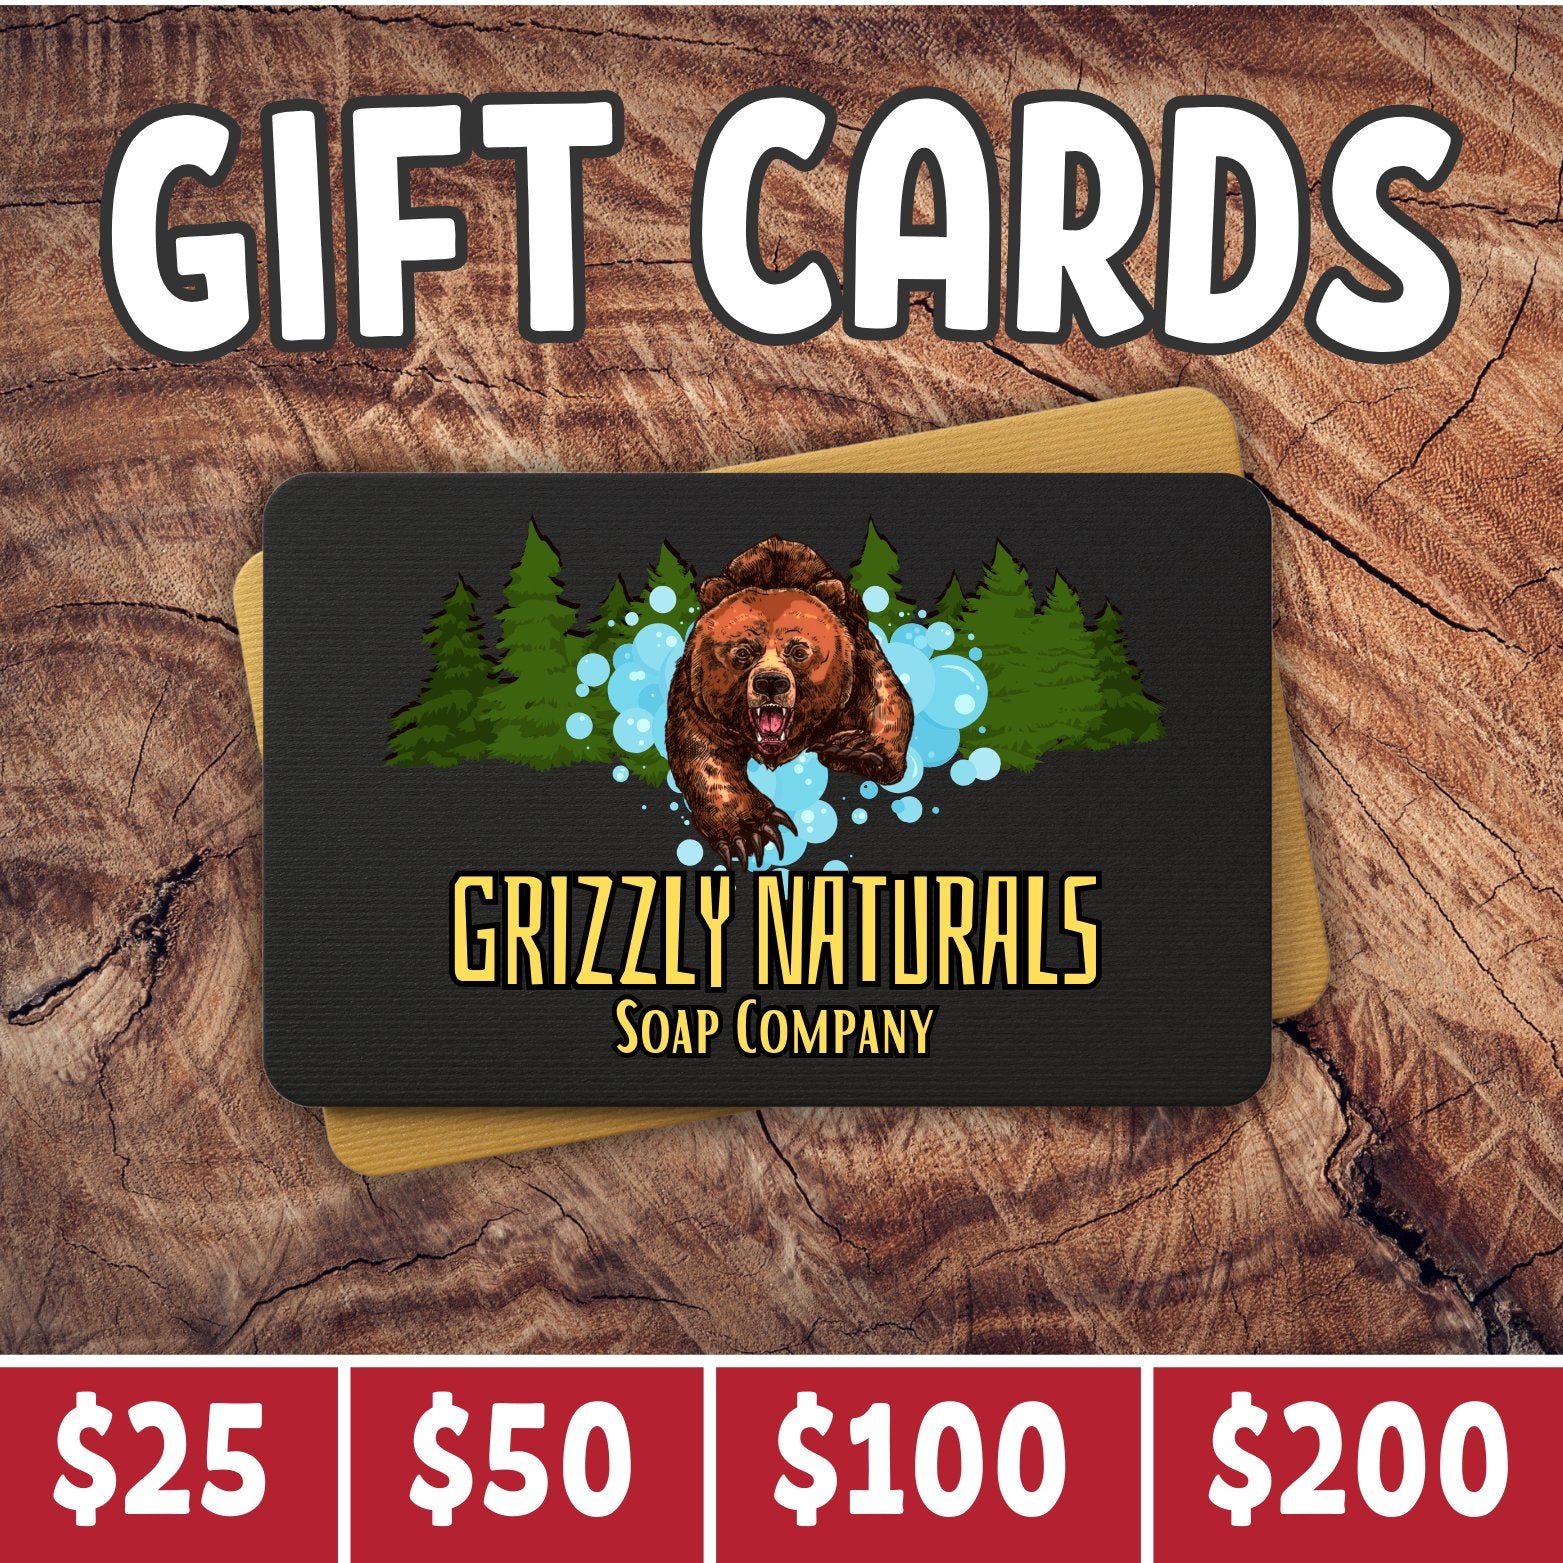 Grizzly Naturals eGift Cards - Grizzly Naturals Soap Company